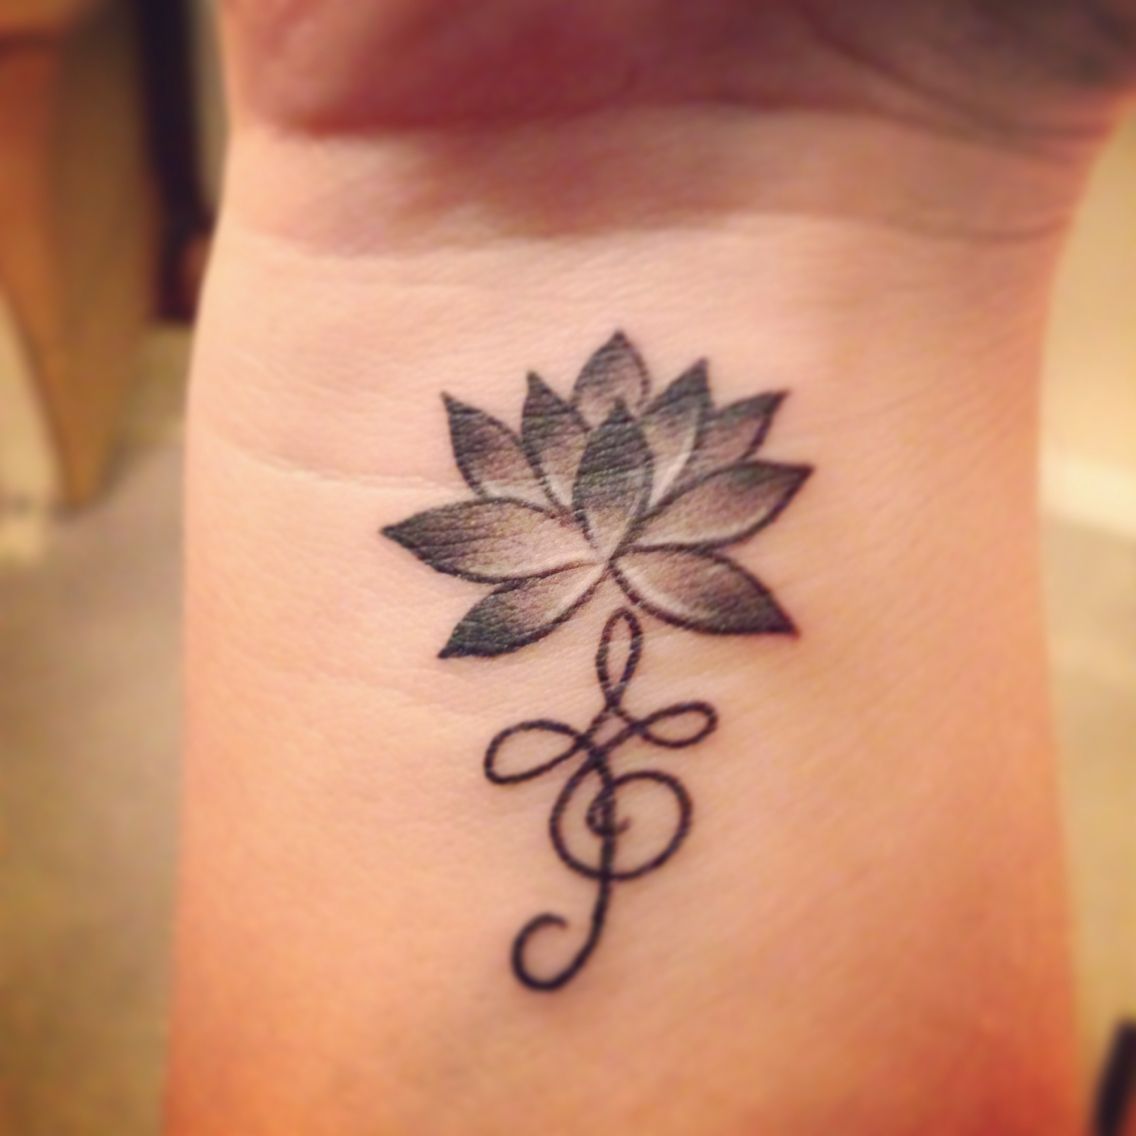 Lotus flower for strength and beauty Zibu symbol meaning embrace life. Marking m… – Lotus flower for strength and beauty Zibu symbol meaning embrace life. Marking my niece’s Lily’s – #Beauty #dr…